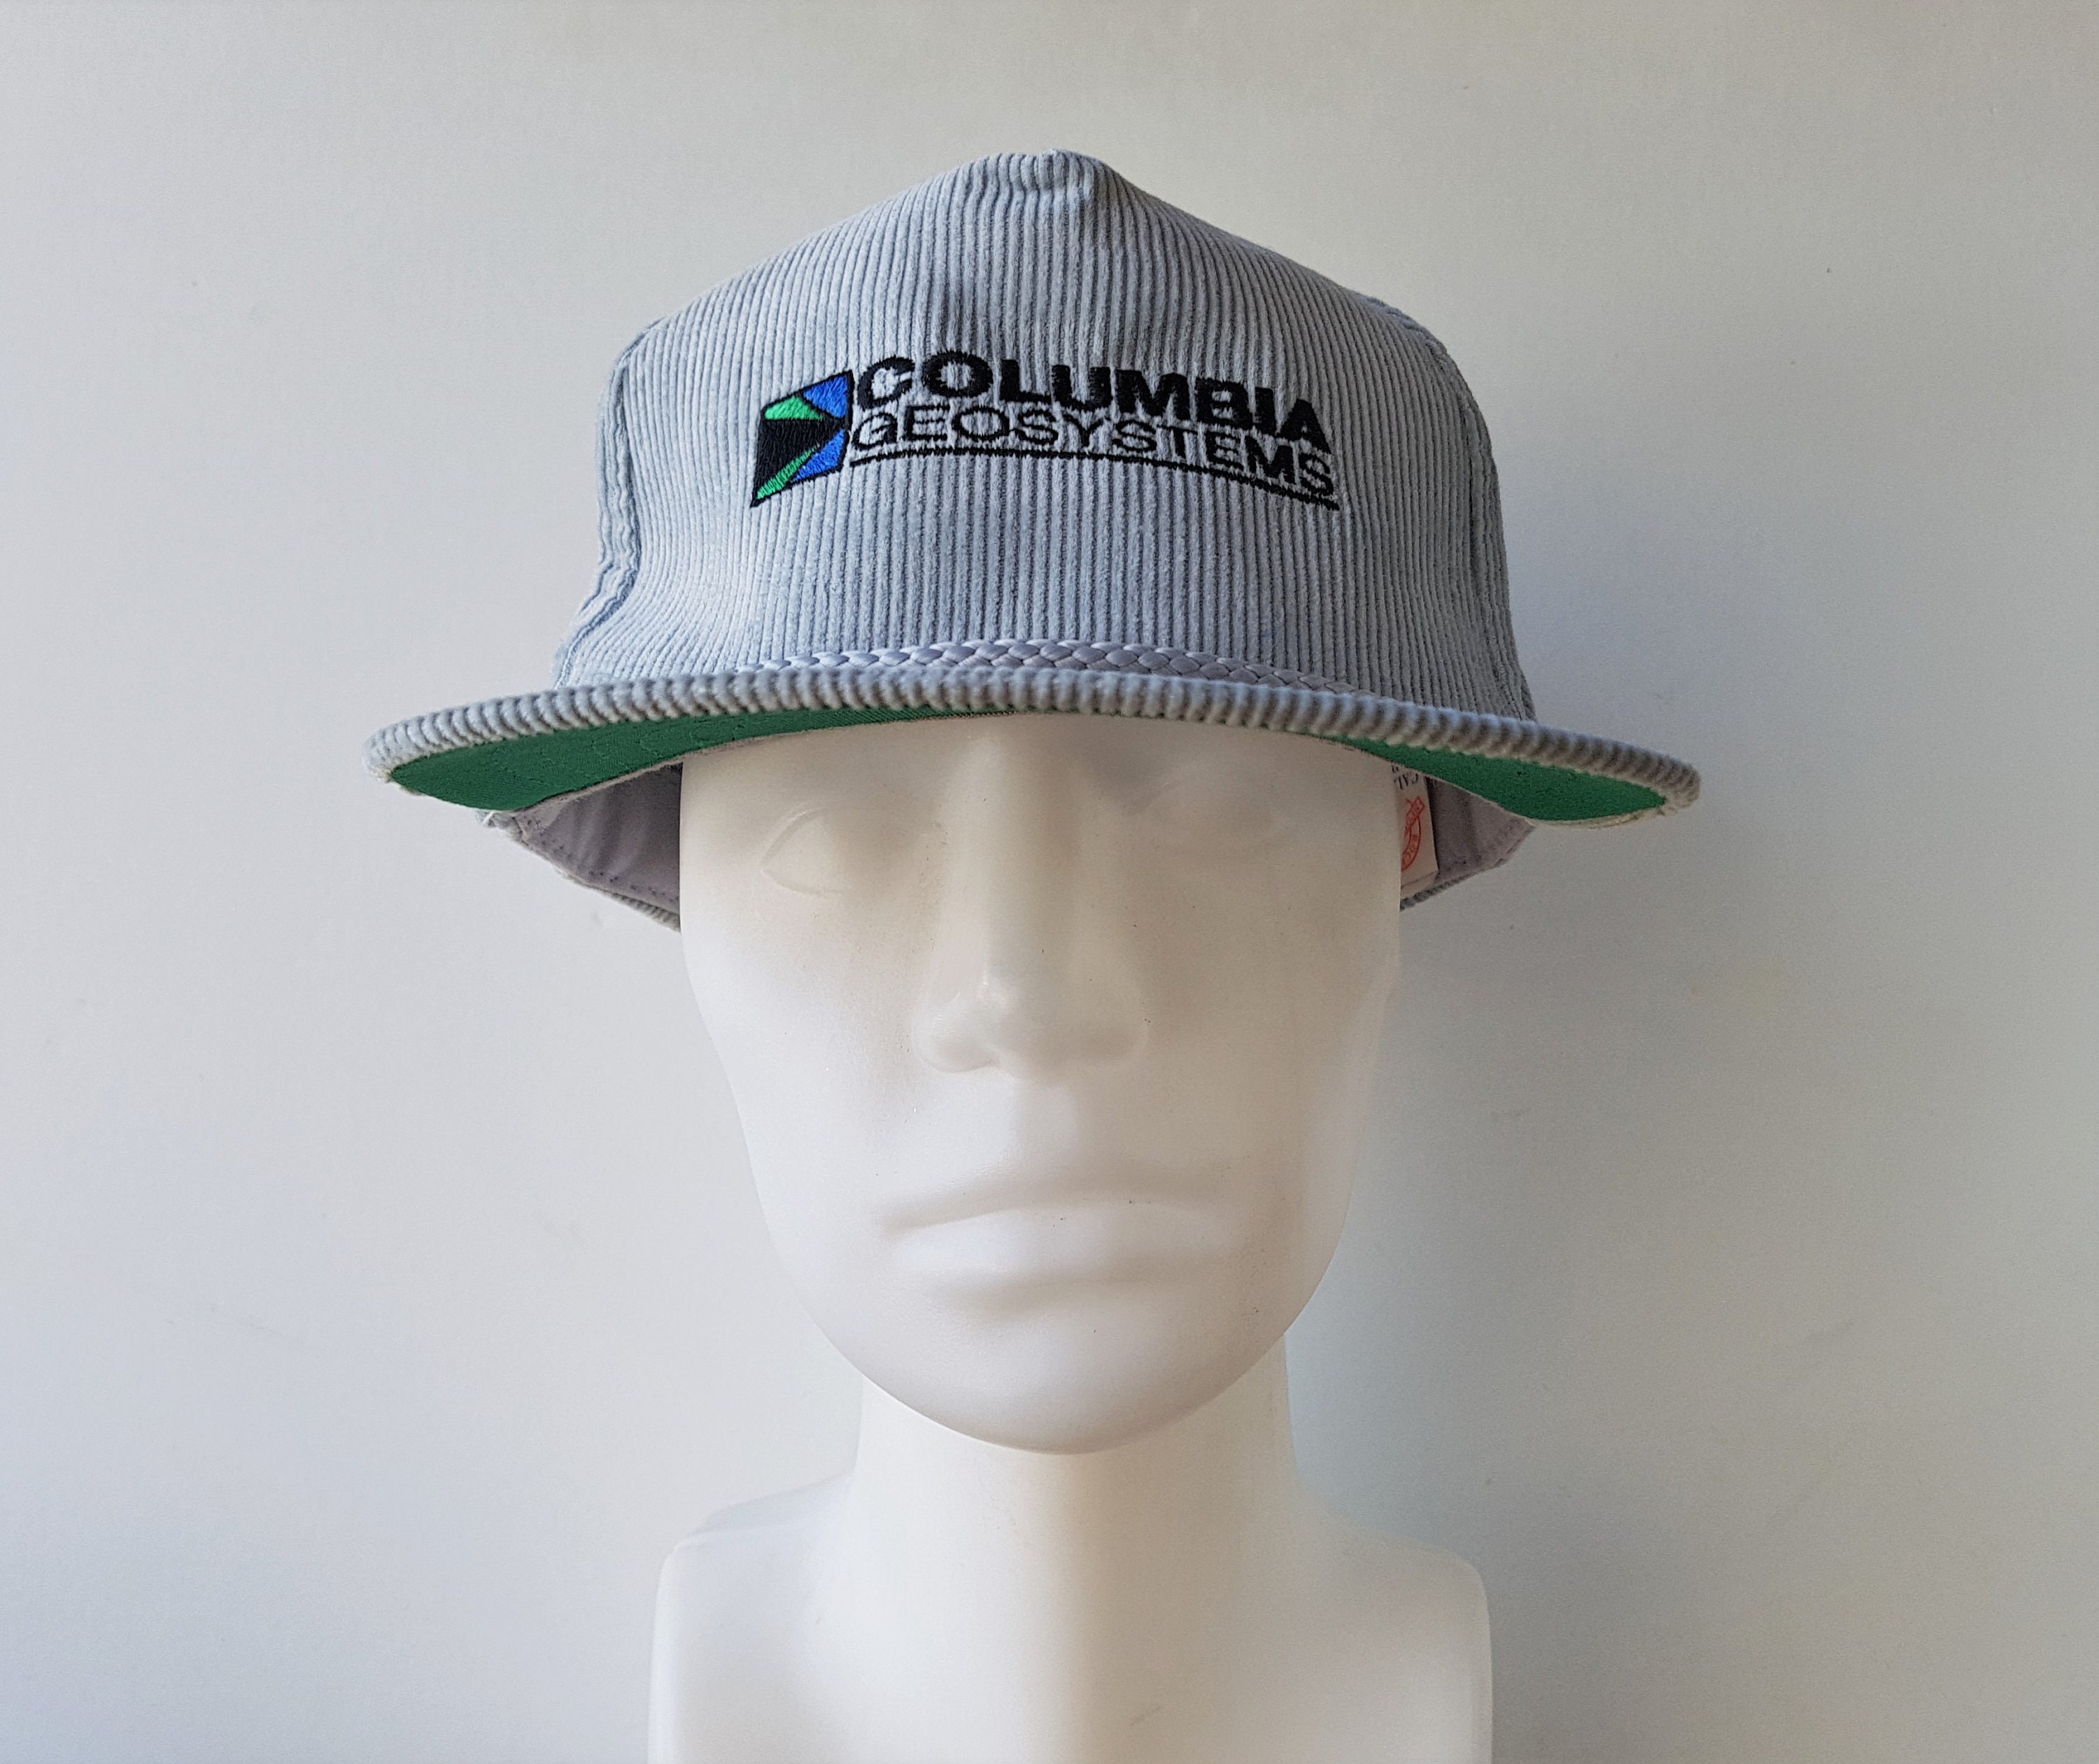 Vintage Columbia GEOSYSTEMS Gray Corduroy Strapback Hat - Rope Lined Calgary Oil & Gas Baseball Cap - Rocky Mountain Sportswear Yupoong Hat